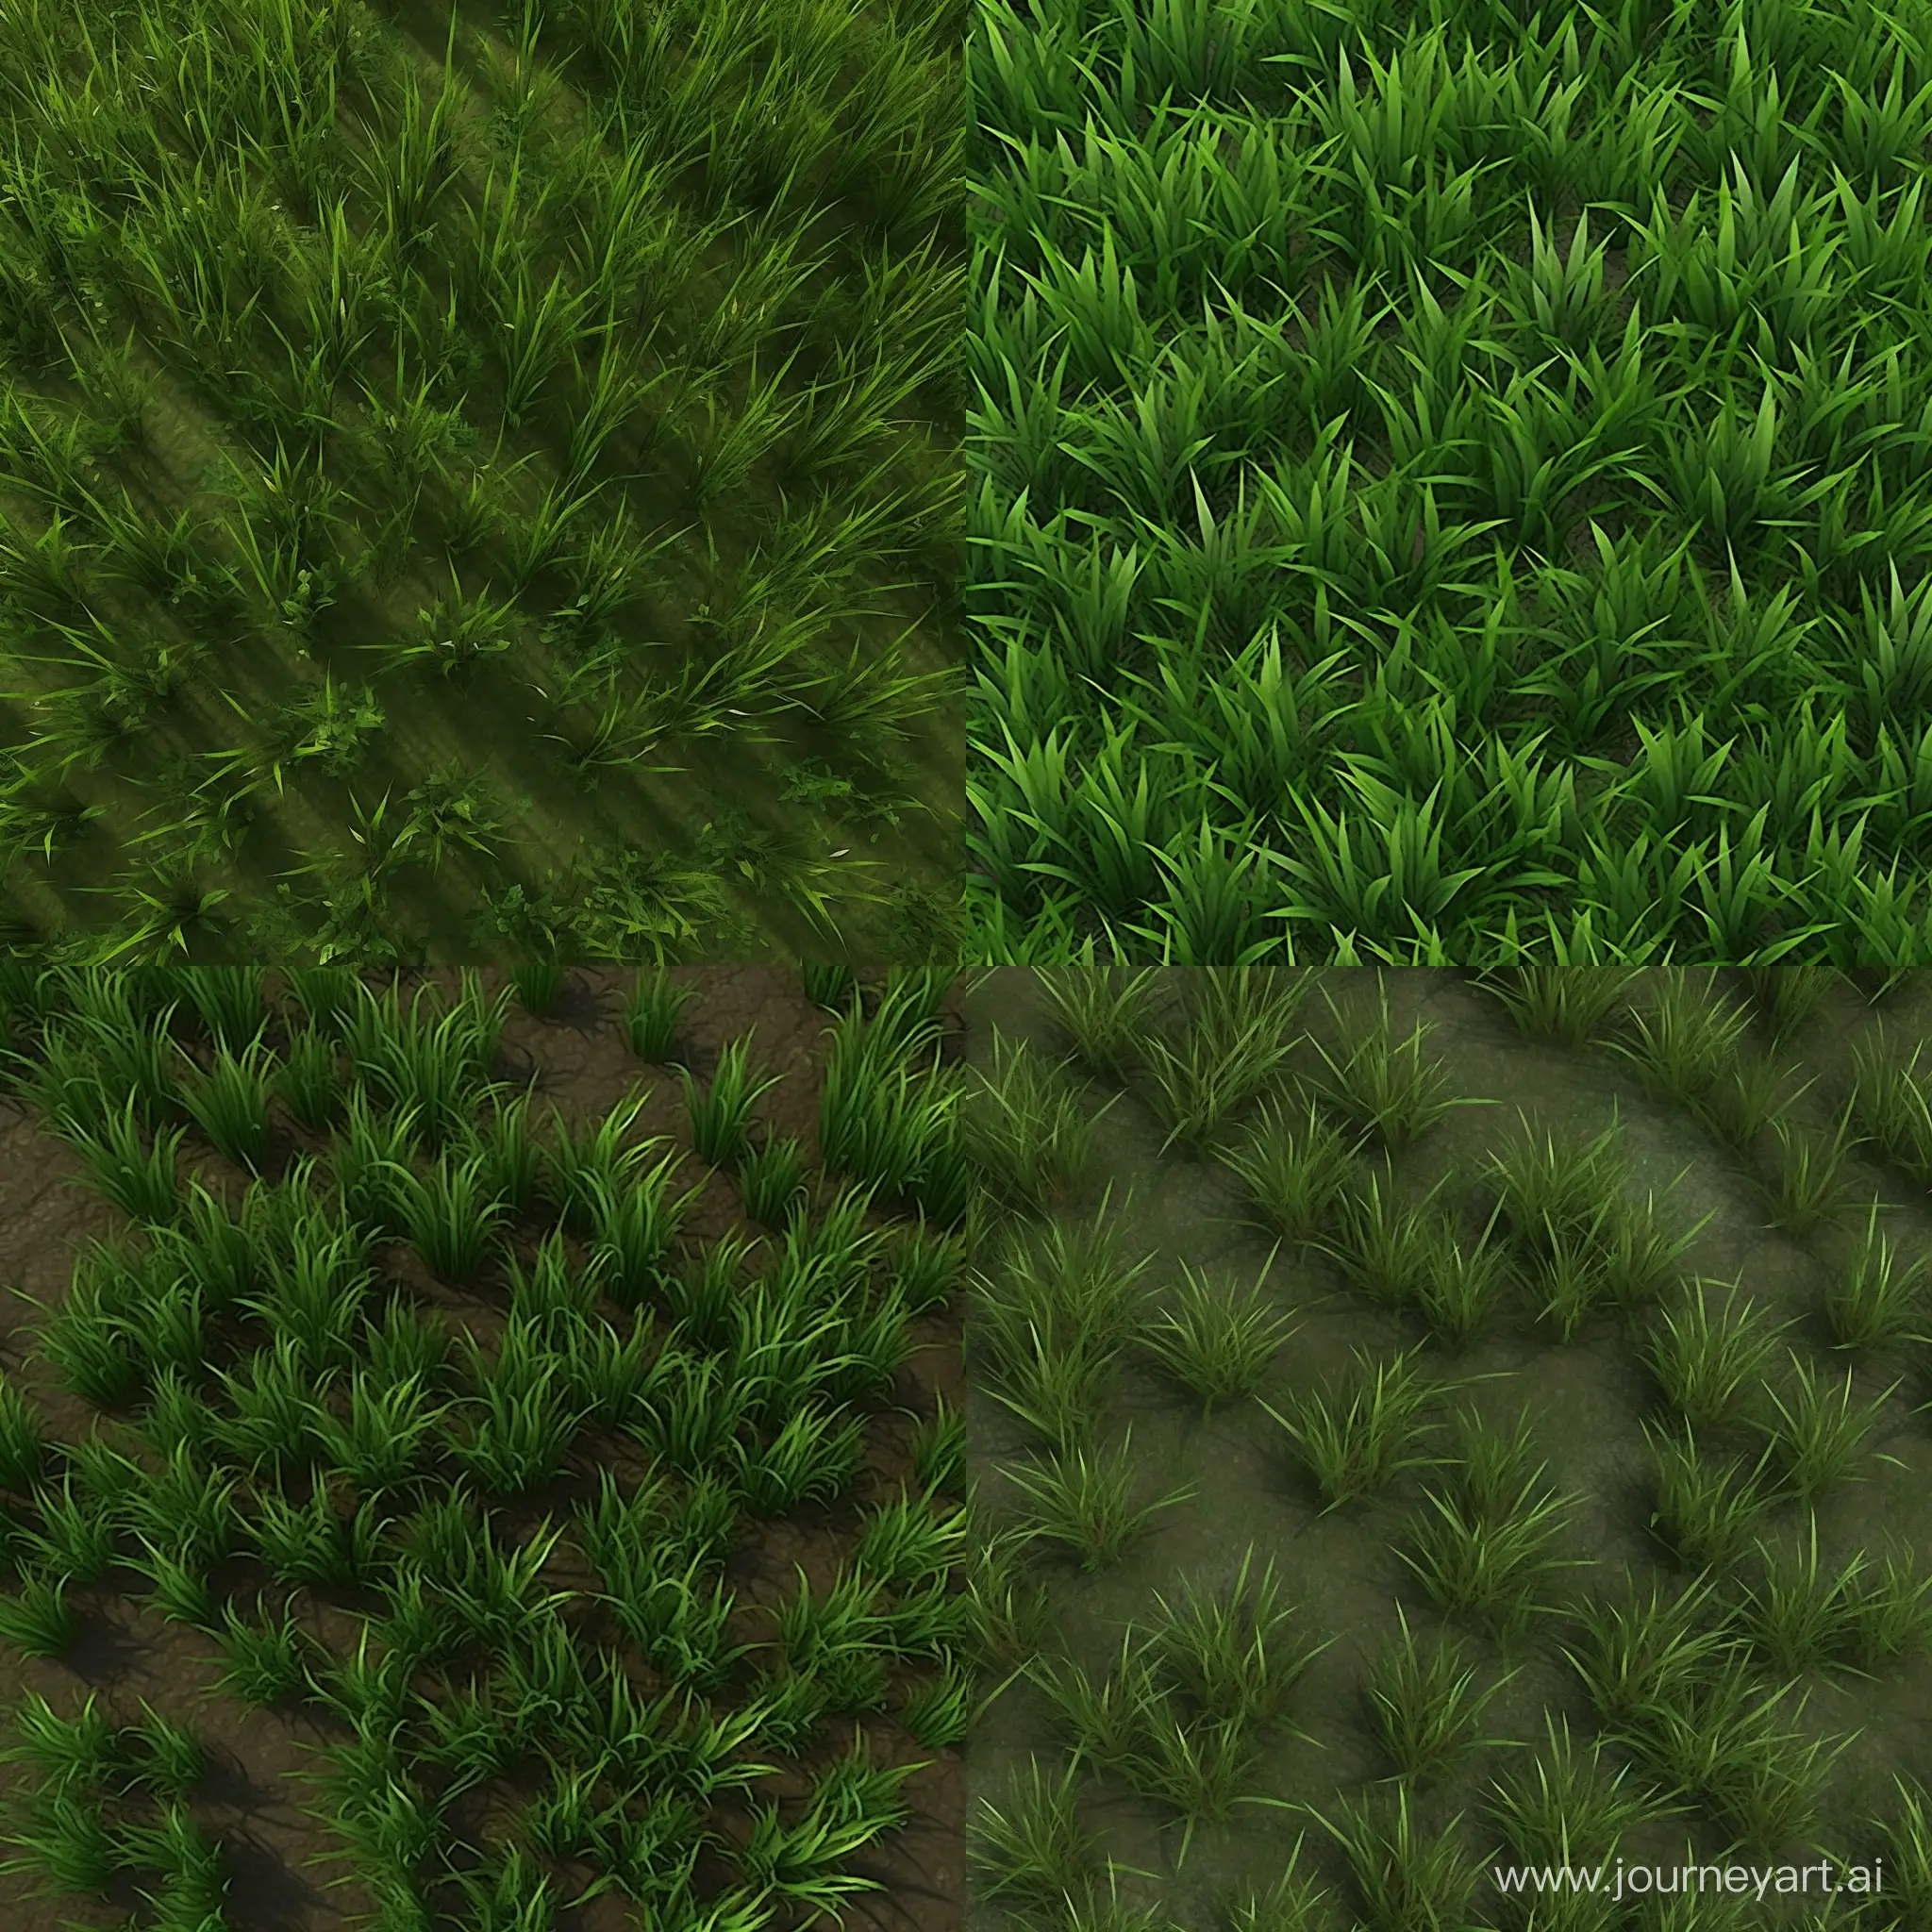 Create a top-down grass texture that can be seamlessly tiled and used as a background for a game environment. The texture should showcase realistic grass blades with varying shades of green, and it should be high-resolution to maintain clarity even when tiled. Consider the lighting and shadows to add depth to the texture. Feel free to incorporate subtle details like small flowers or scattered leaves to enhance the realism of the grass texture."